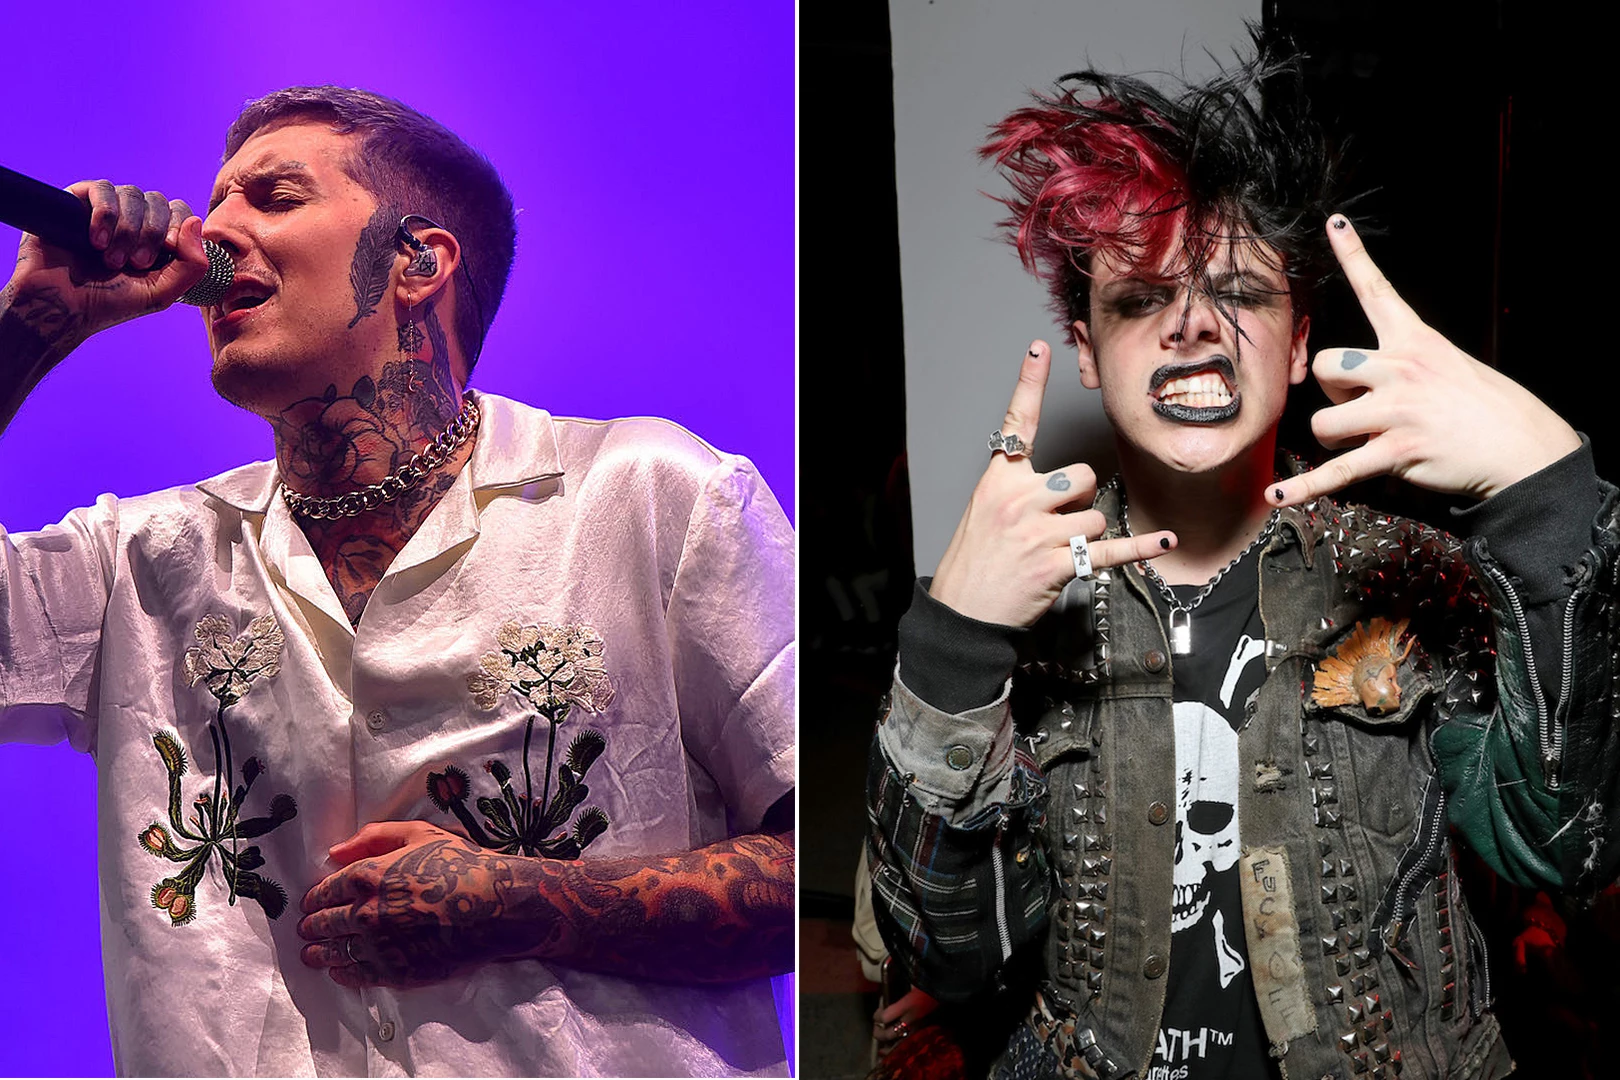 BRING ME THE HORIZON Frontman Comments On 'The Impersonator